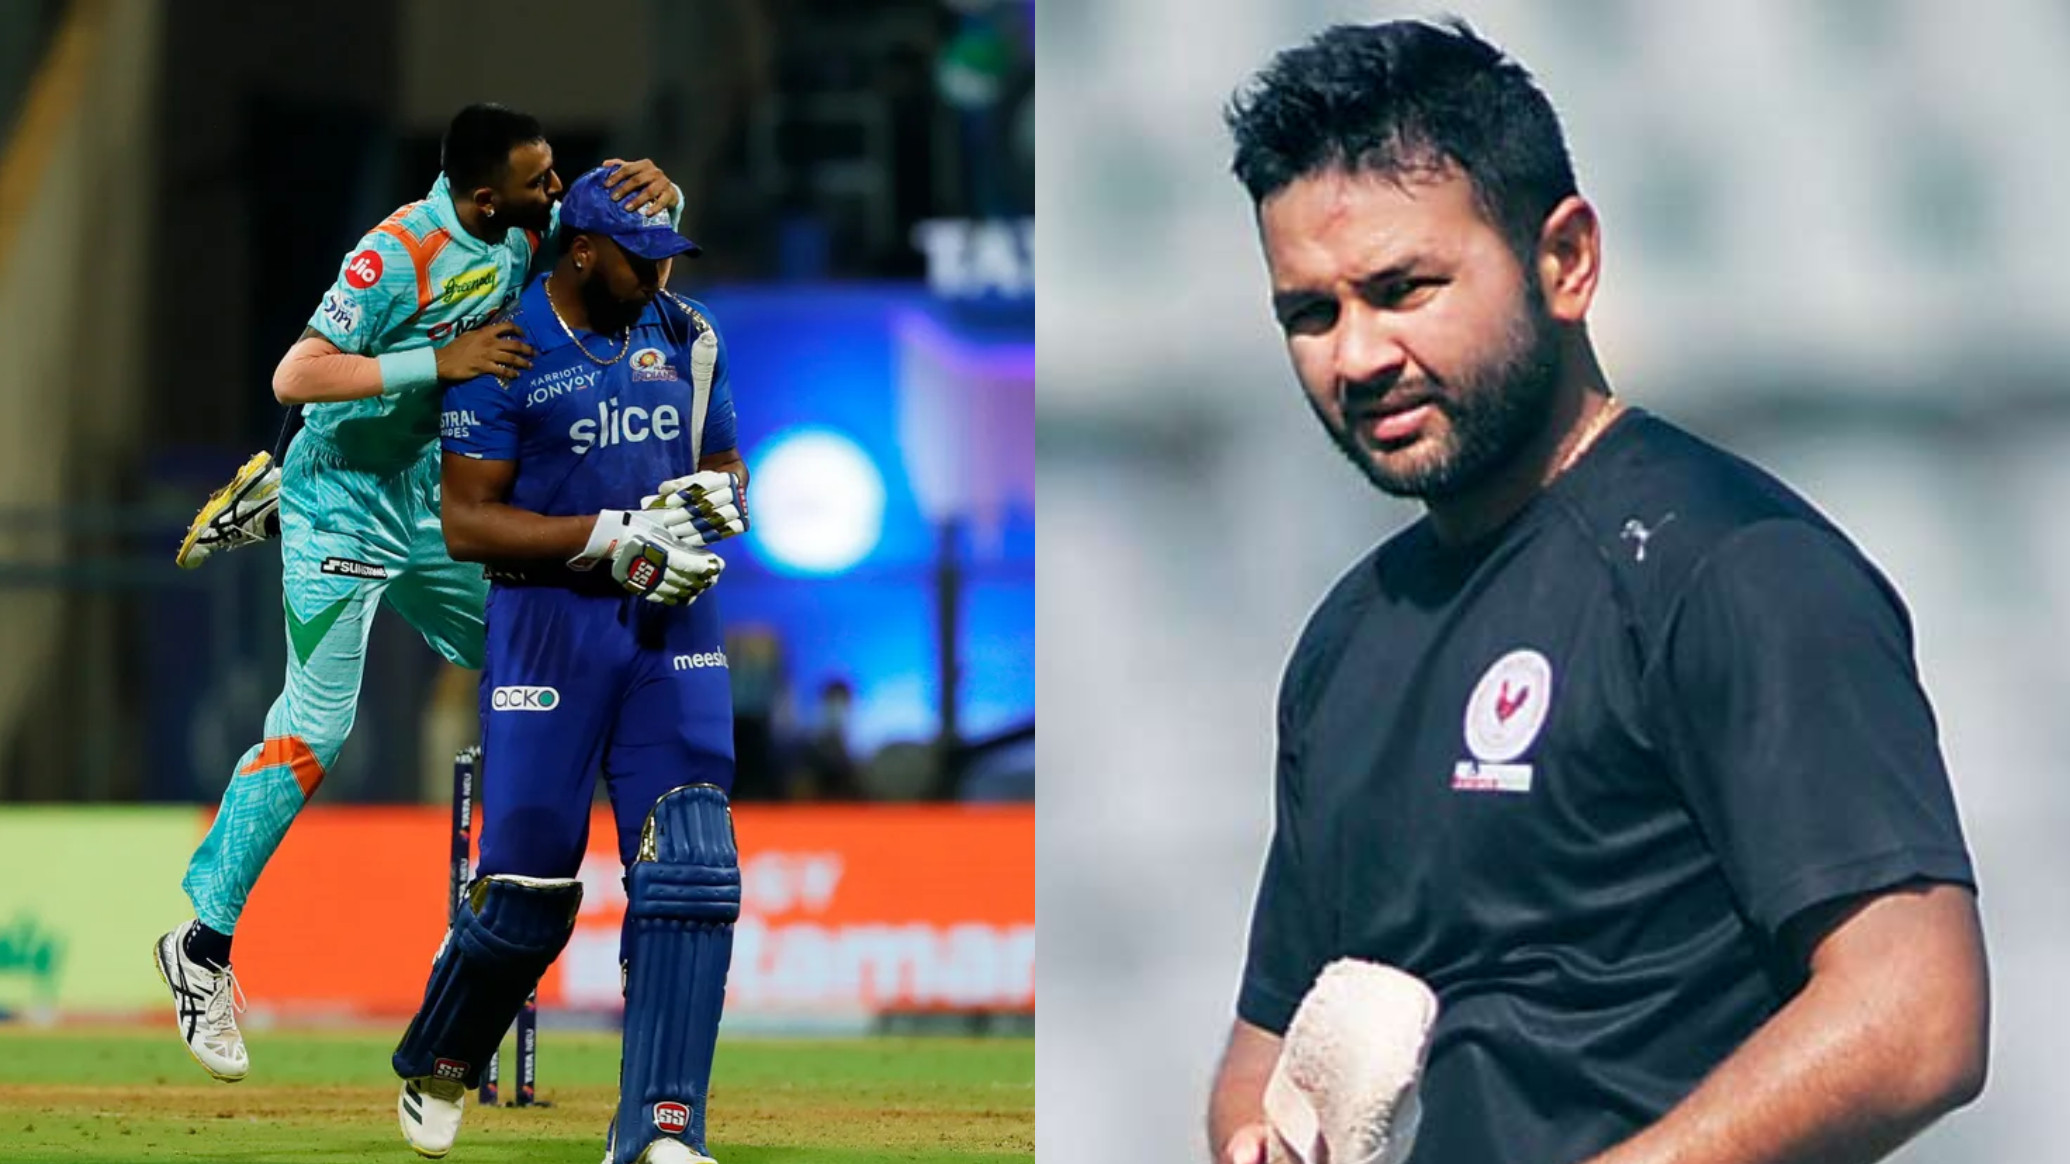 IPL 2022: It was over the top; what if he had turned back, reacted: Parthiv on Krunal kissing Pollard